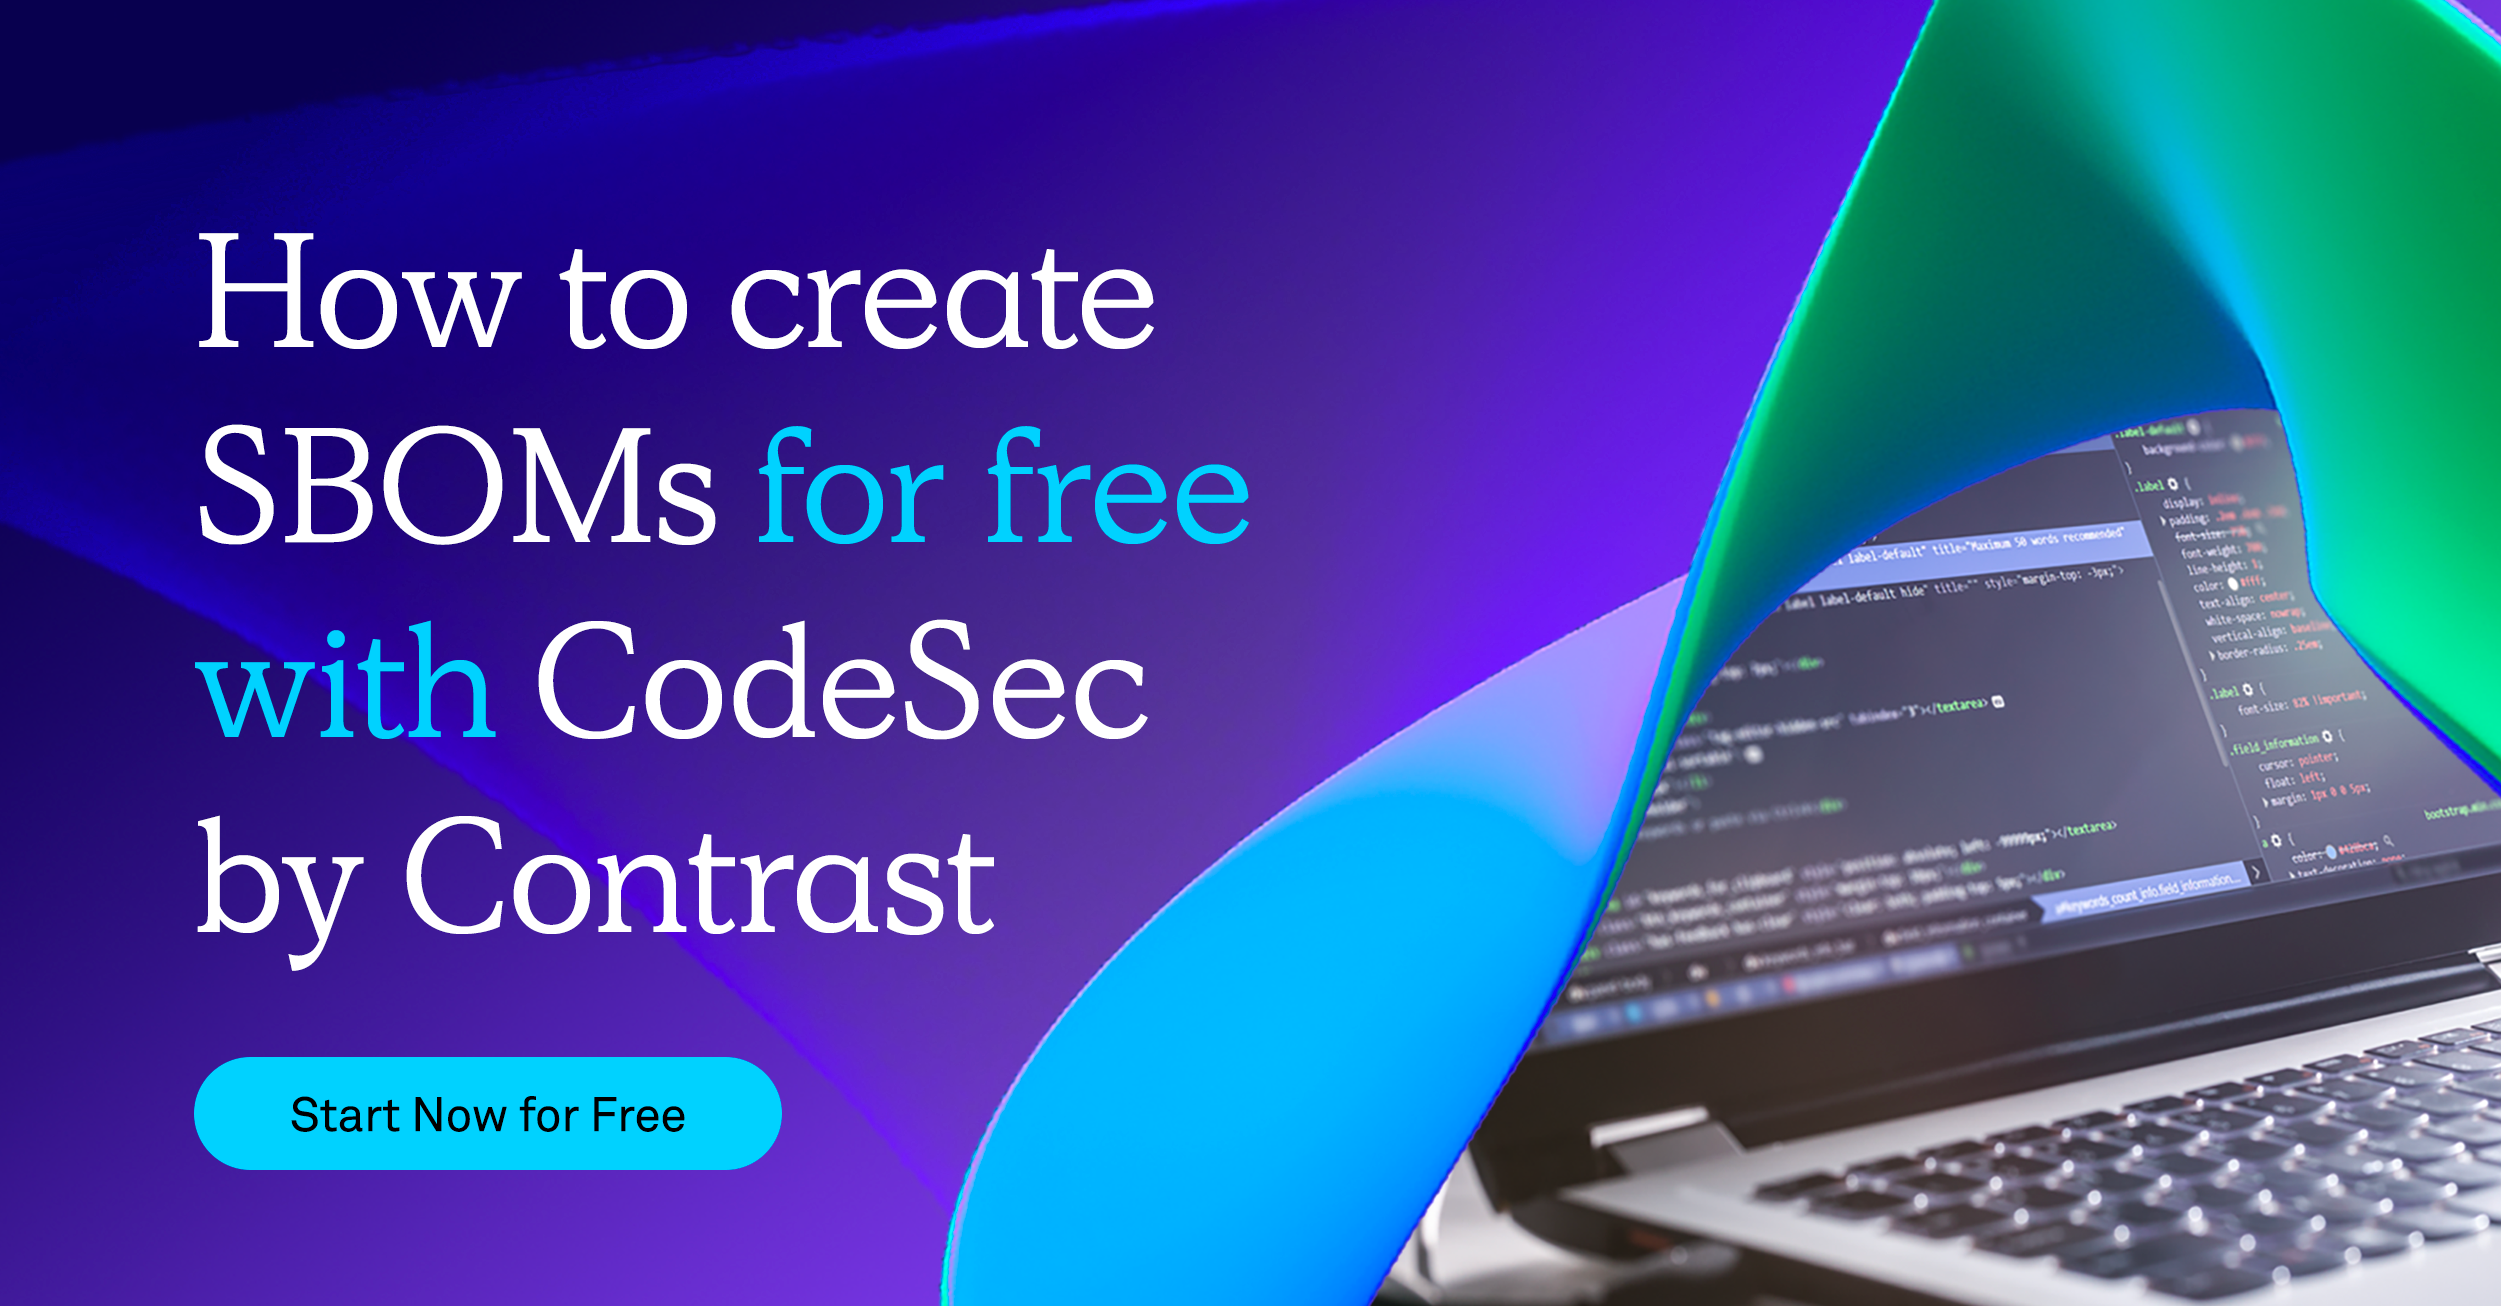 How to create SBOMs for free with CodeSec by Contrast